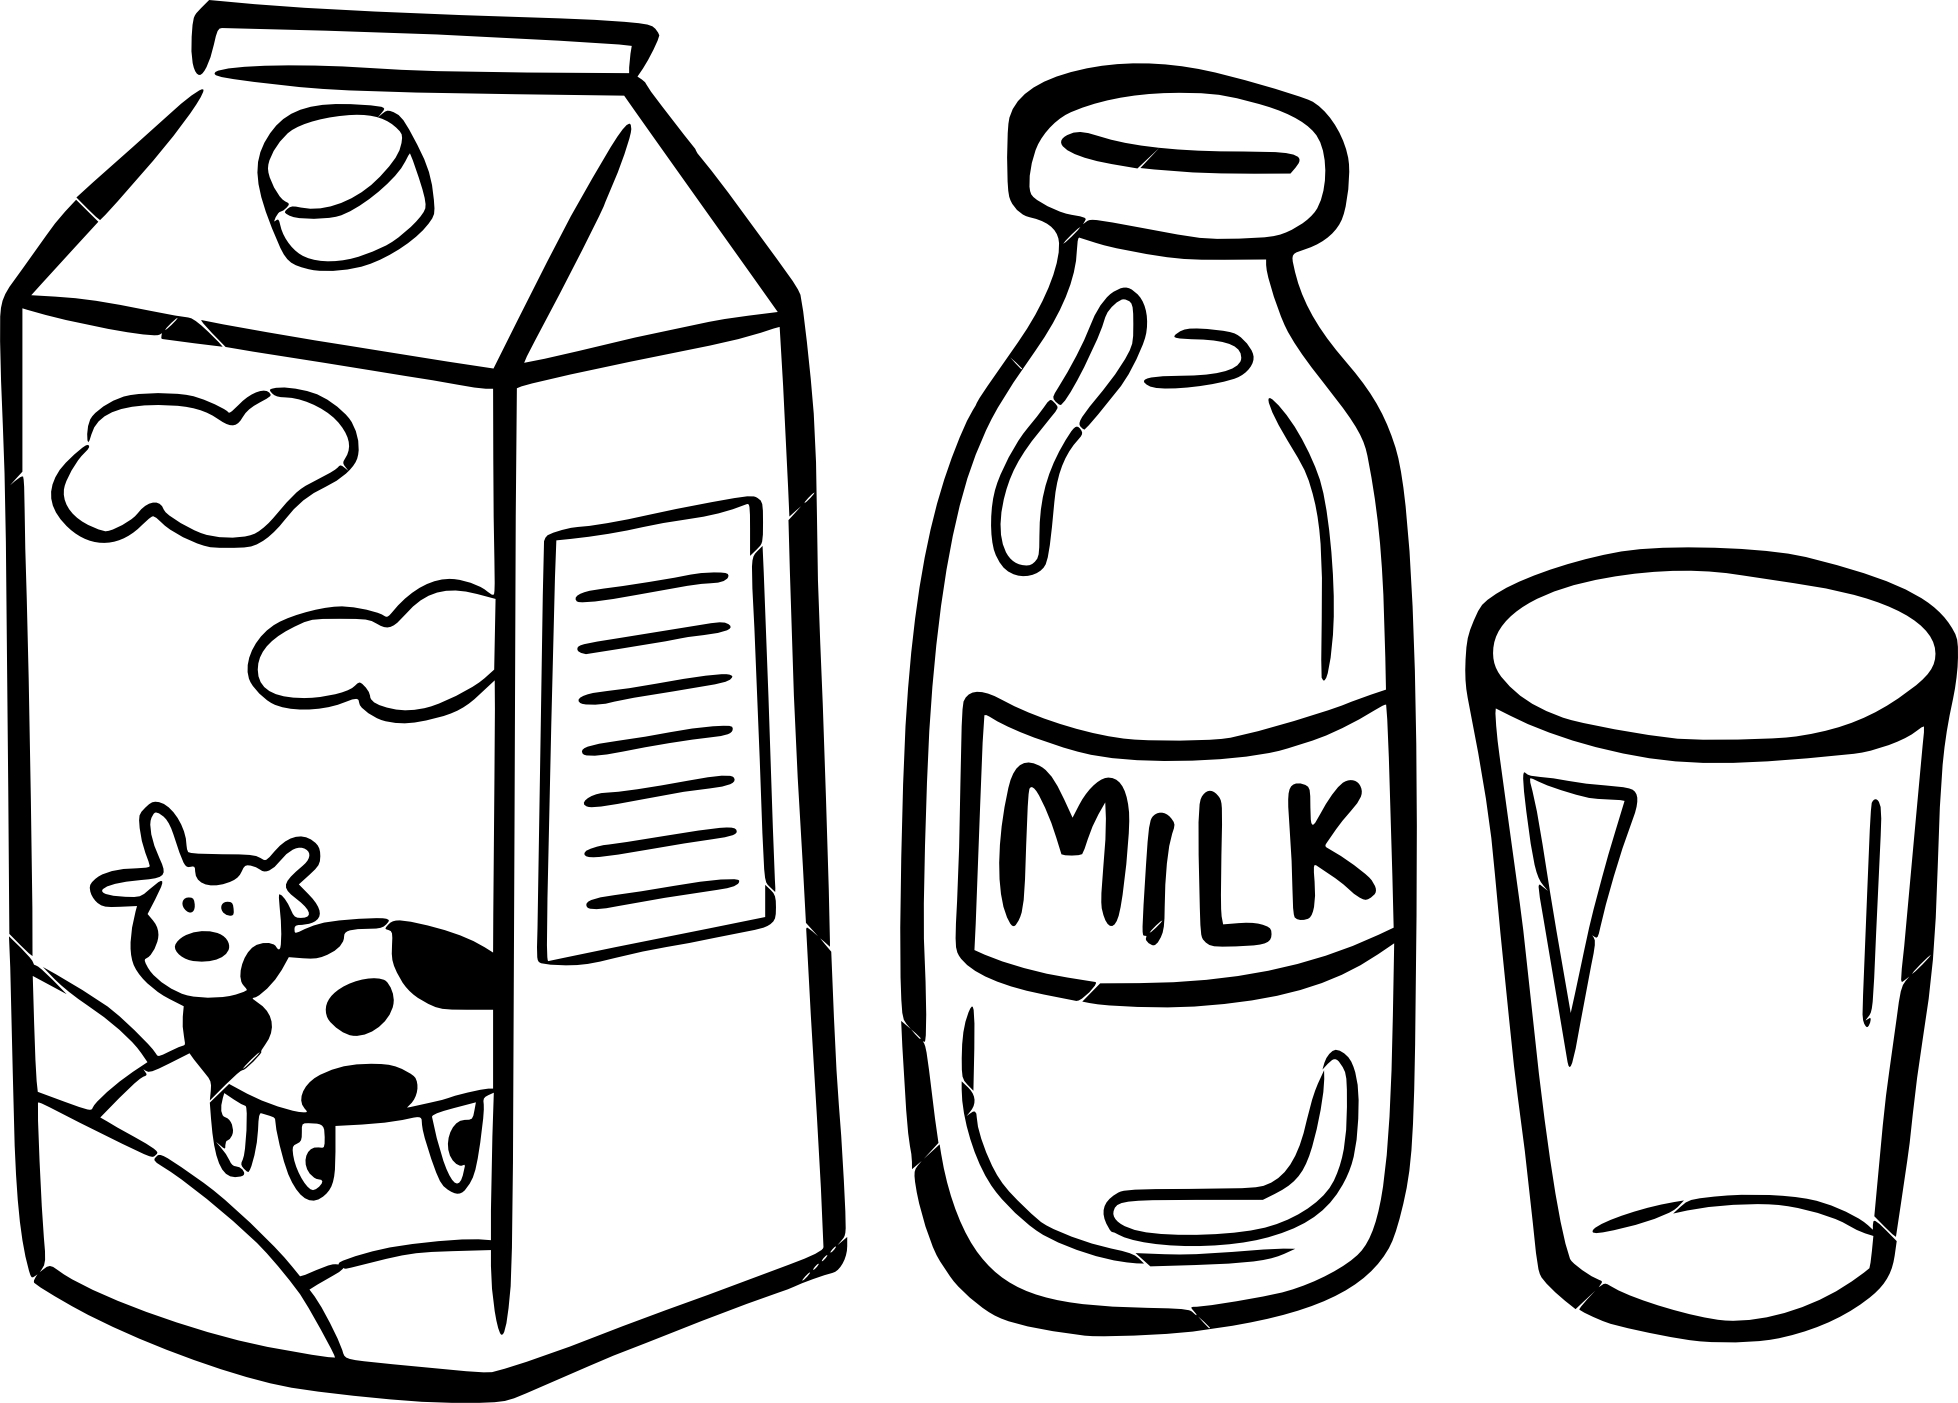 Bottle Of Milk coloring page